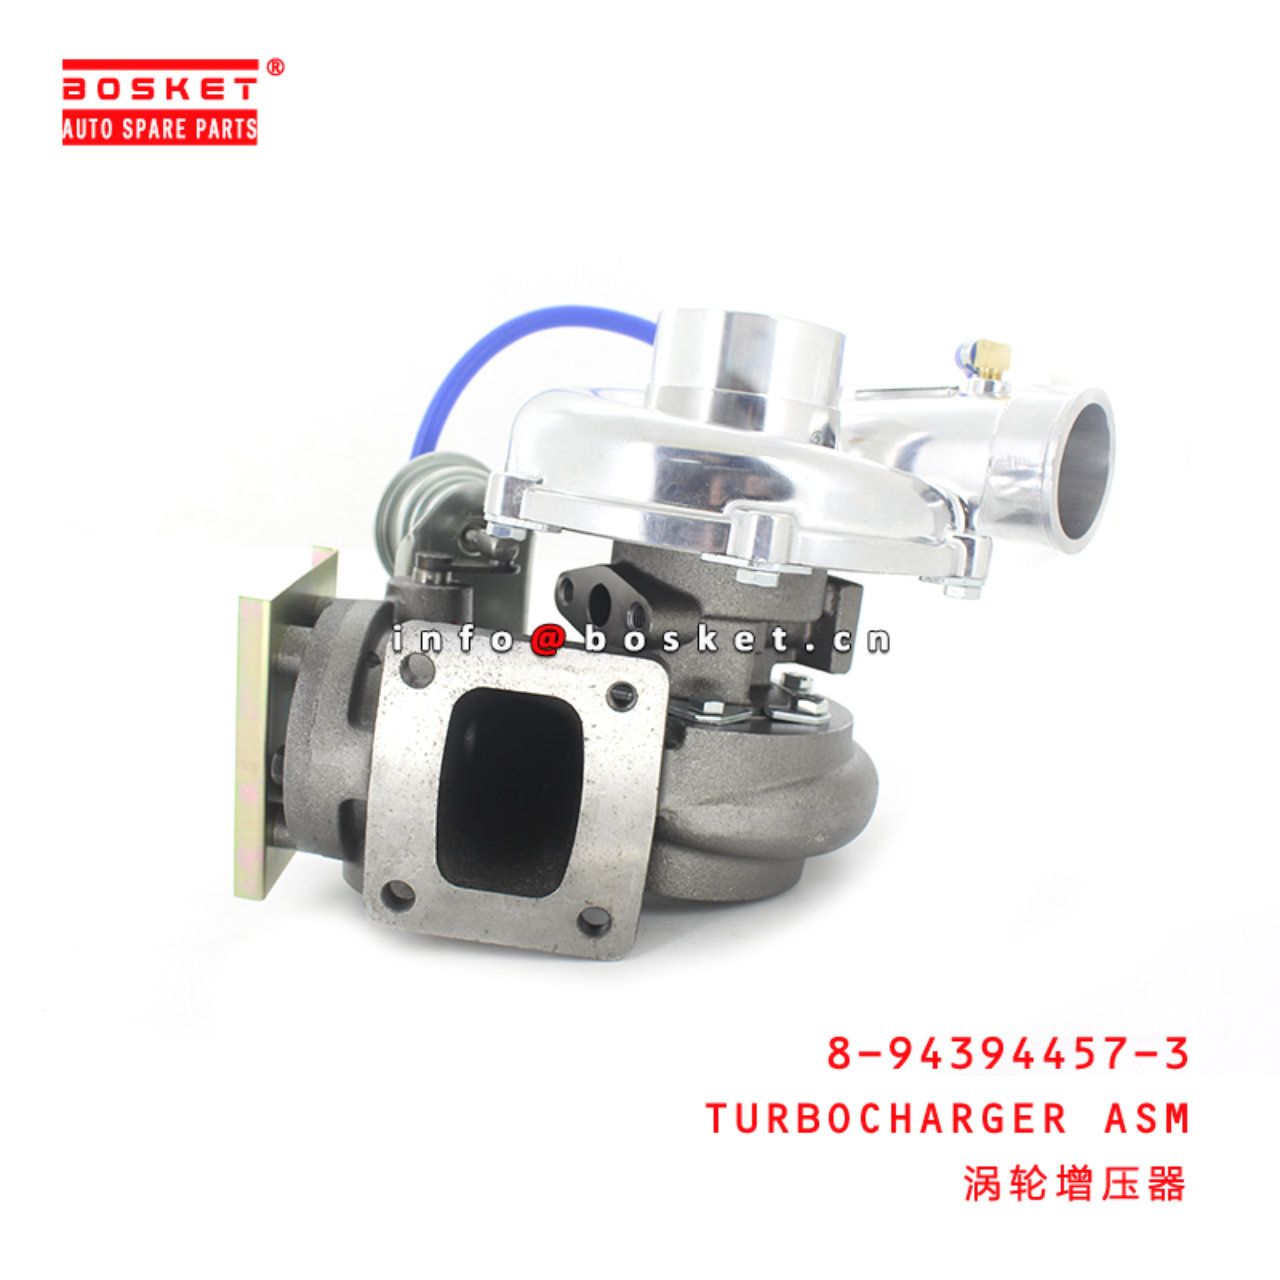 8-94394457-3 Turbocharger Assembly Suitable for ISUZU FVR32 8943944573